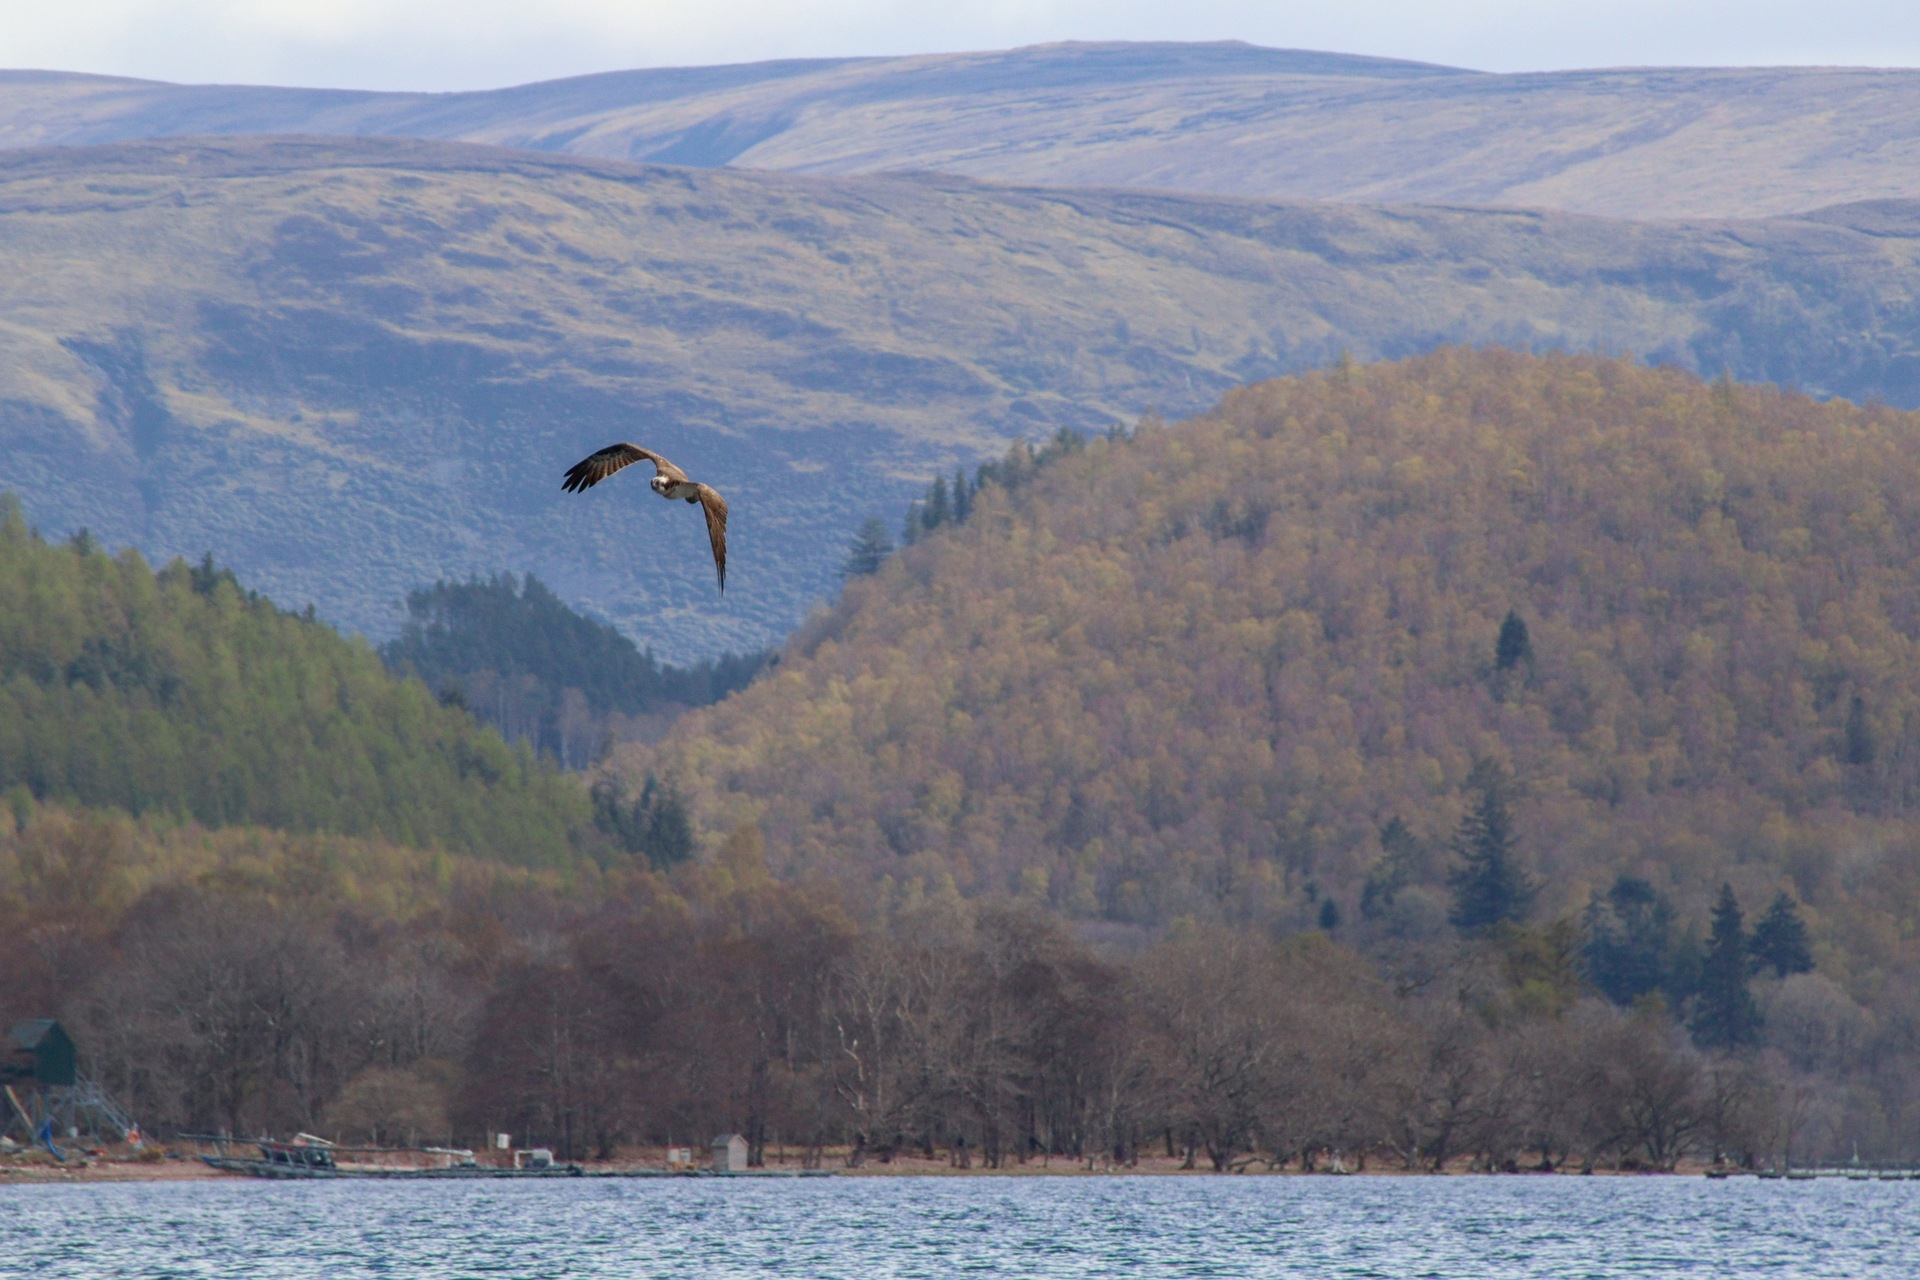 Louis the Osprey soaring over Loch Arkaig.